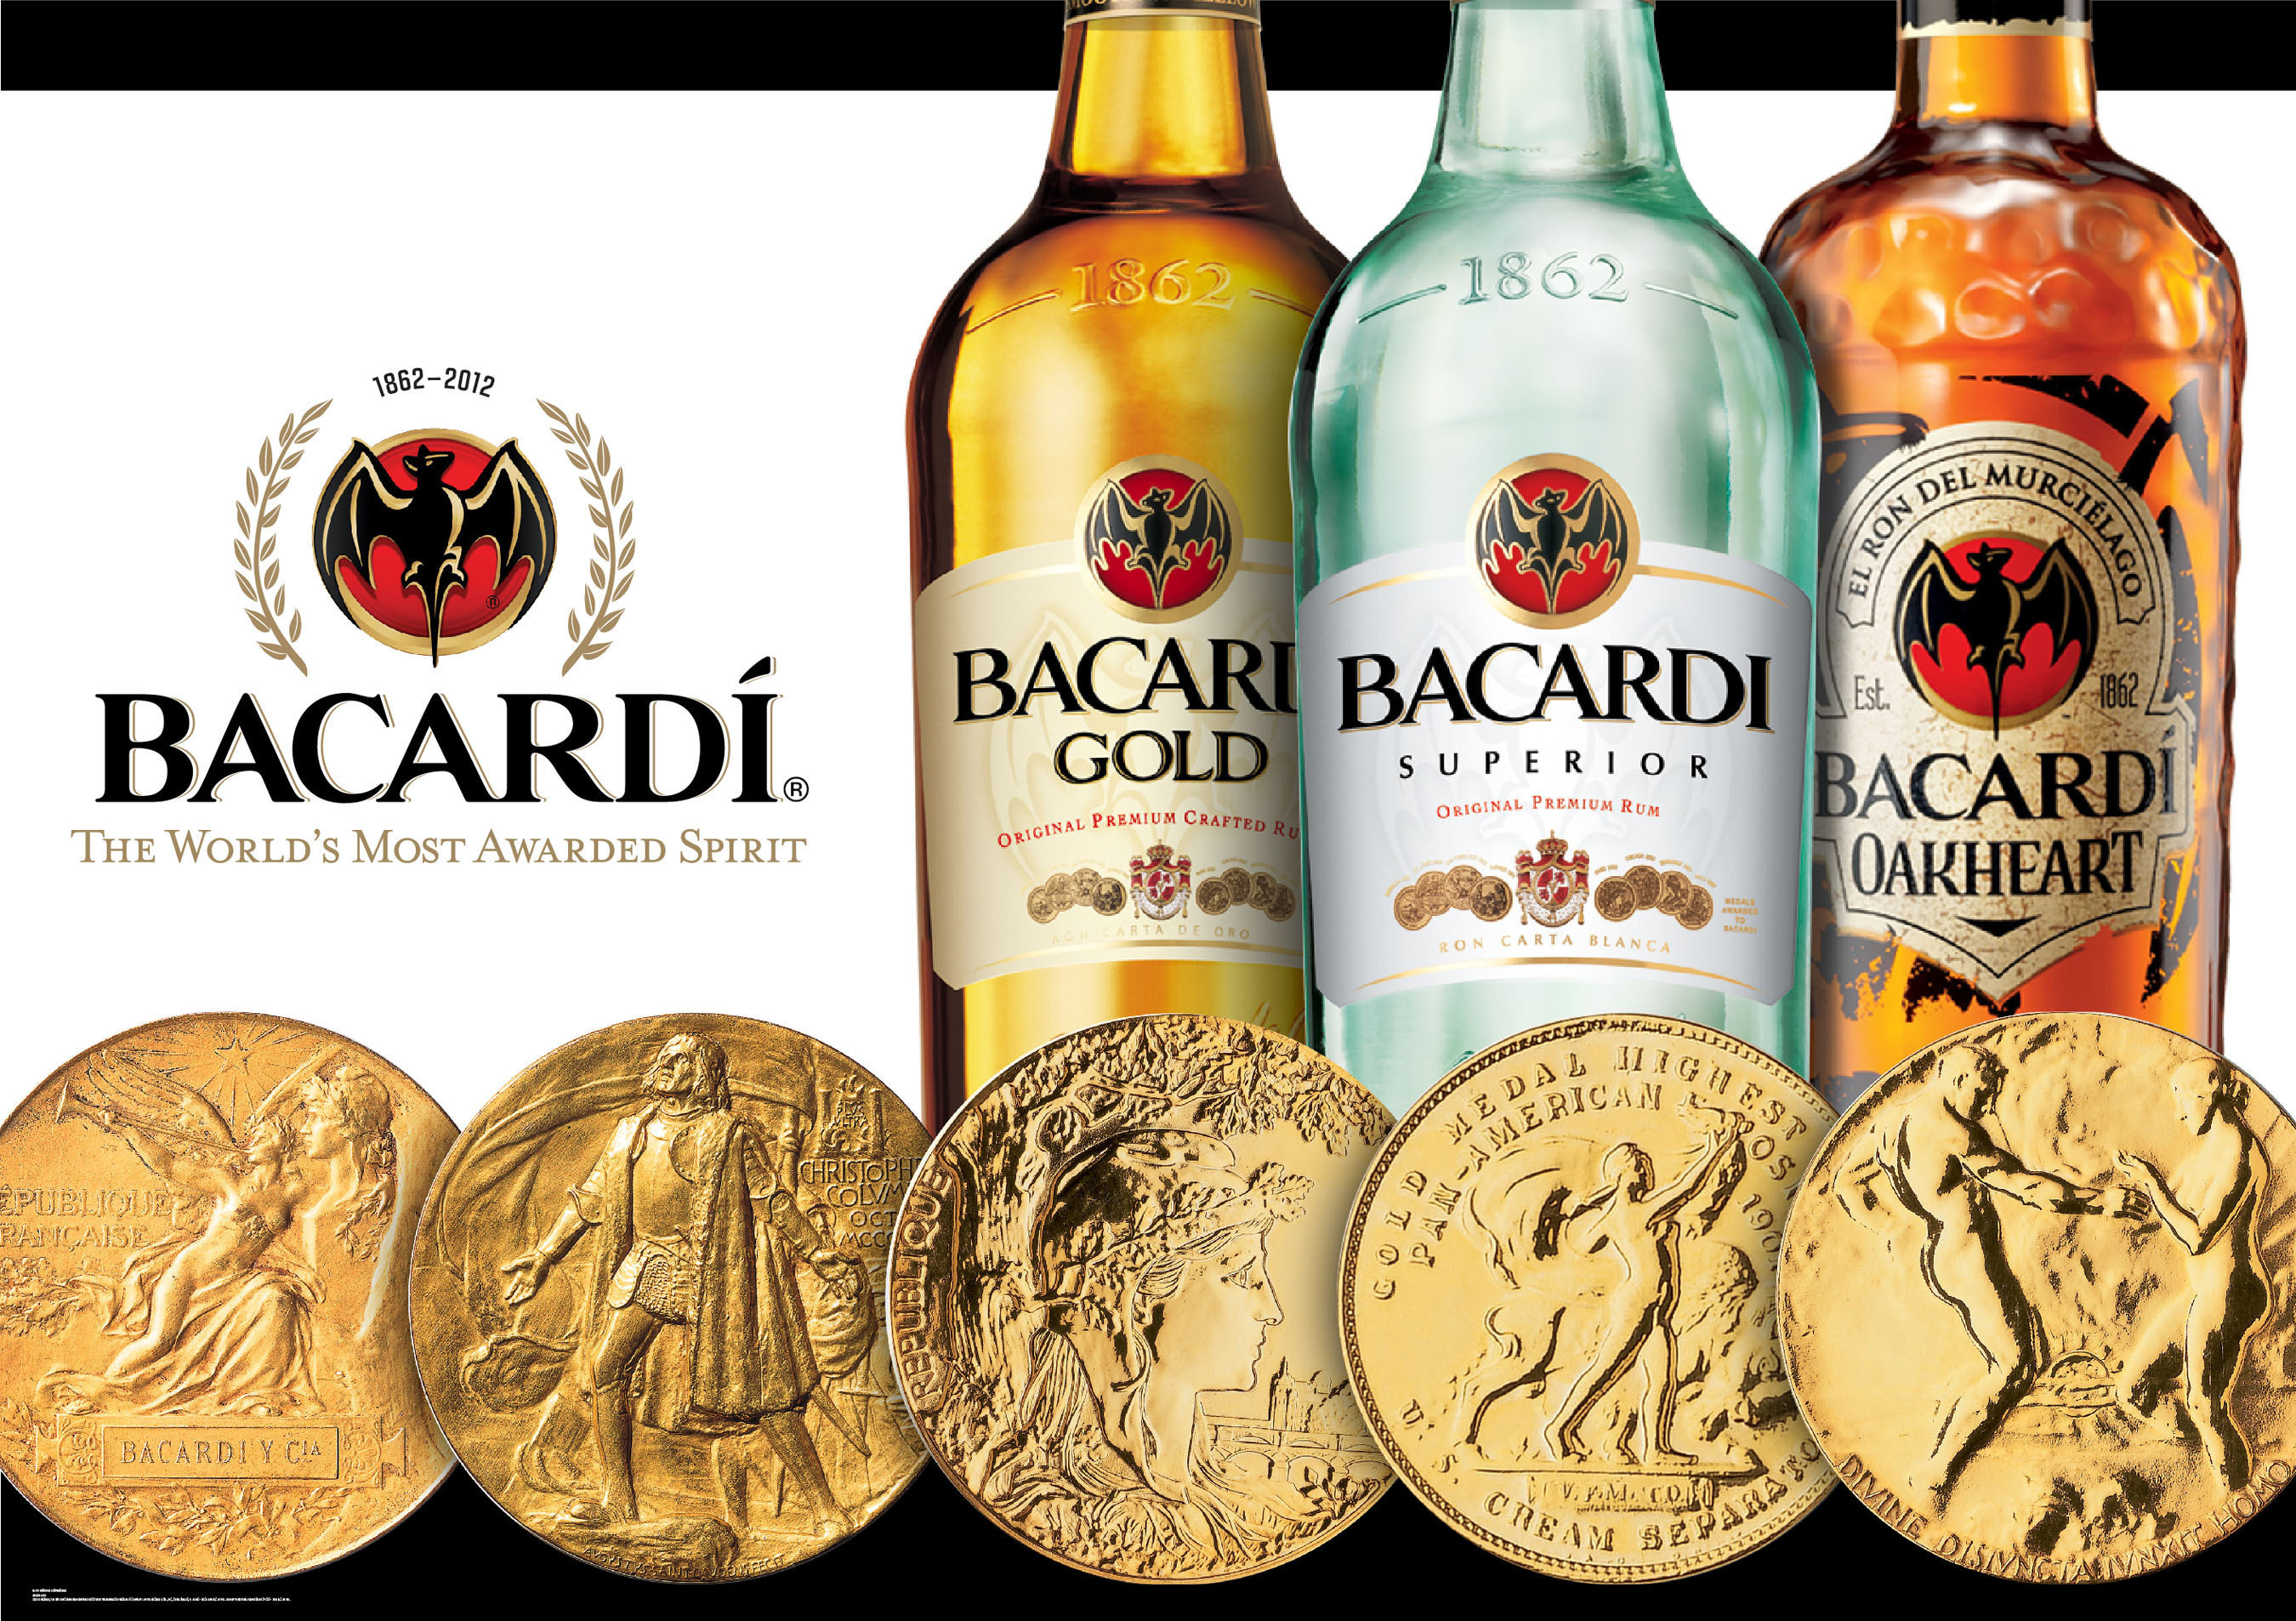 BACARDI Rum--The World\'s Most Awarded Quality Top Superior And Taste For Accolade Spirit--Celebrates